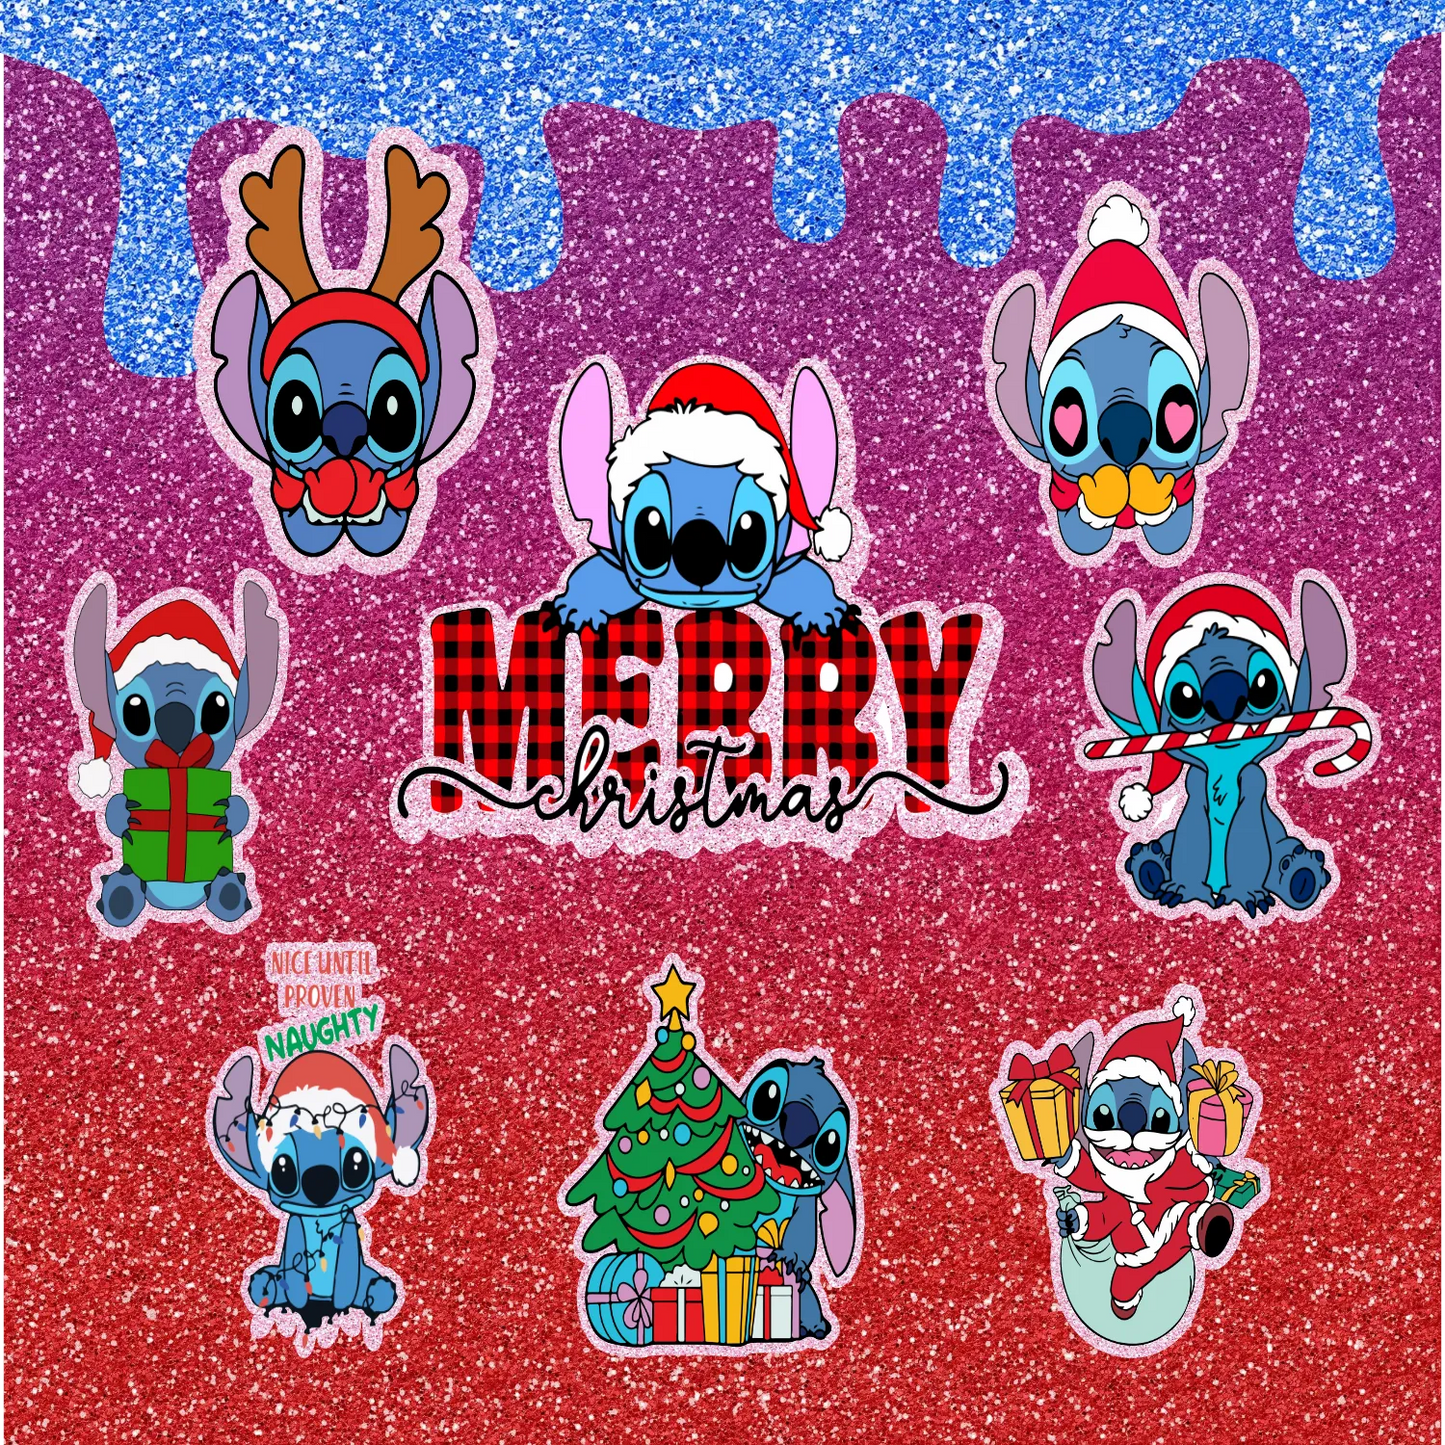 Christmas Wearing Blue Alien - Multicolored w/ Red, Purple & Blue Sparkly Background - 20 Oz Sublimation Transfer